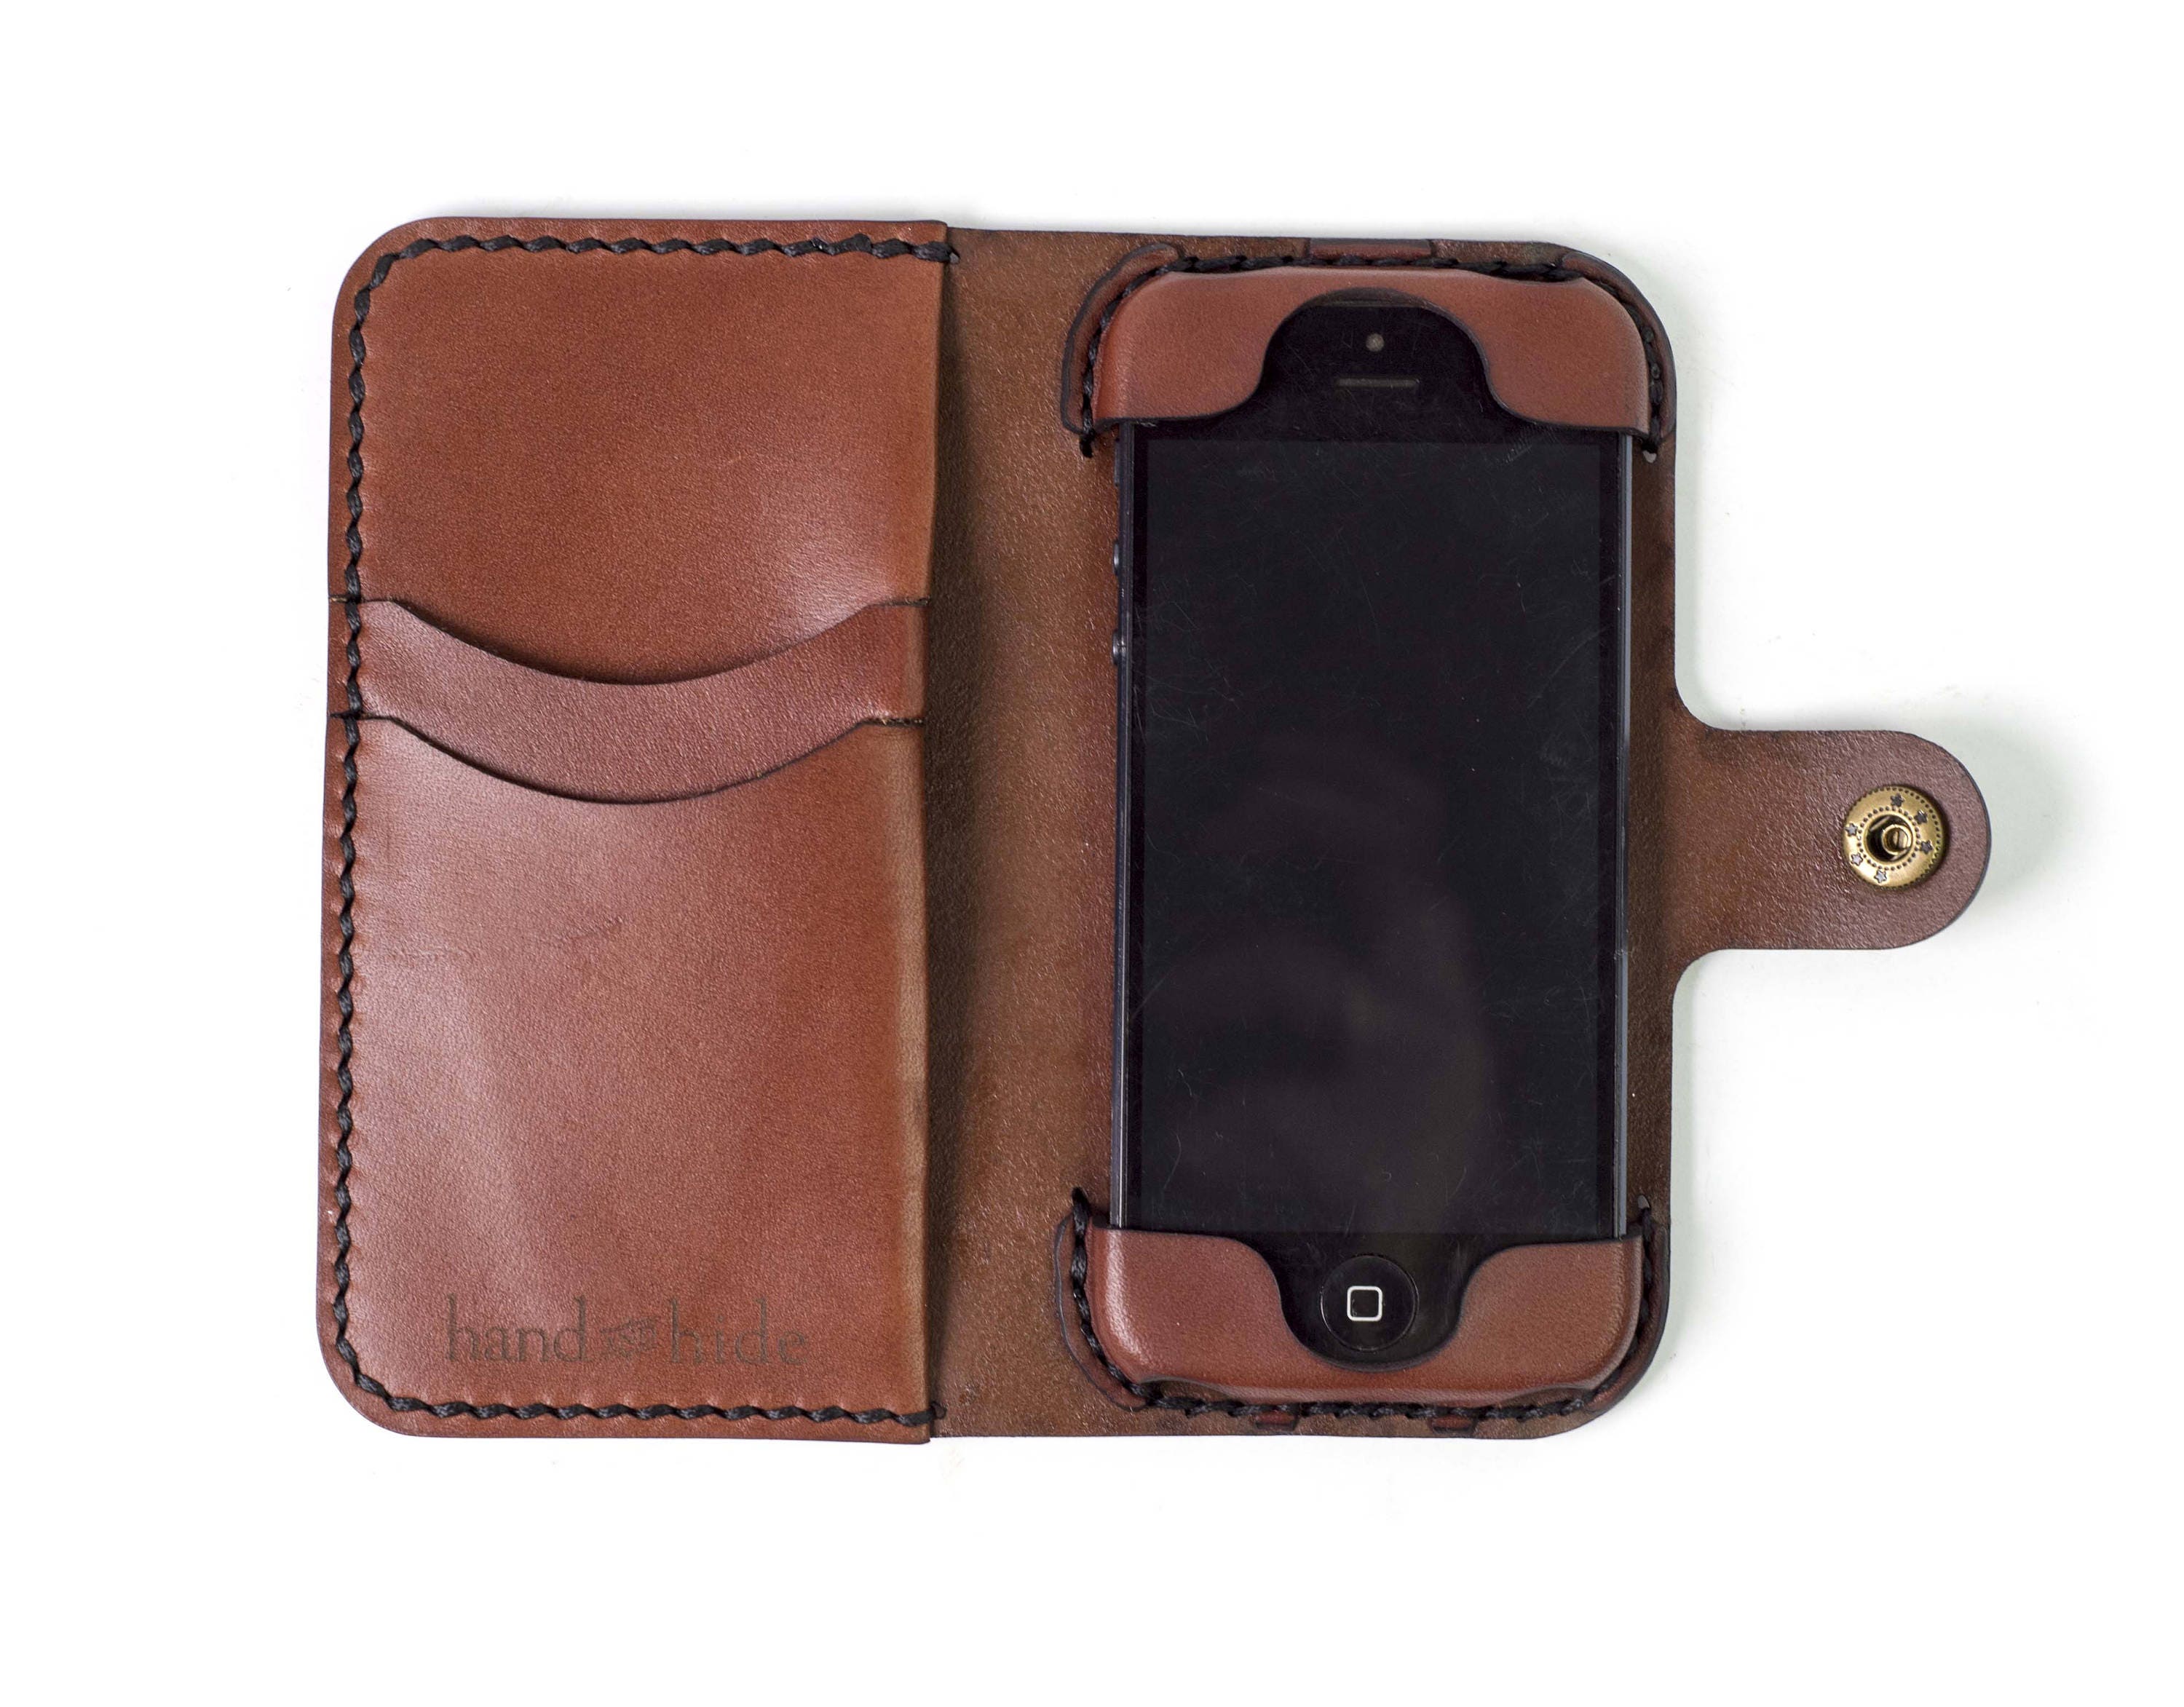 Iphone 5 5s 5c Leather Wallet - Etsy